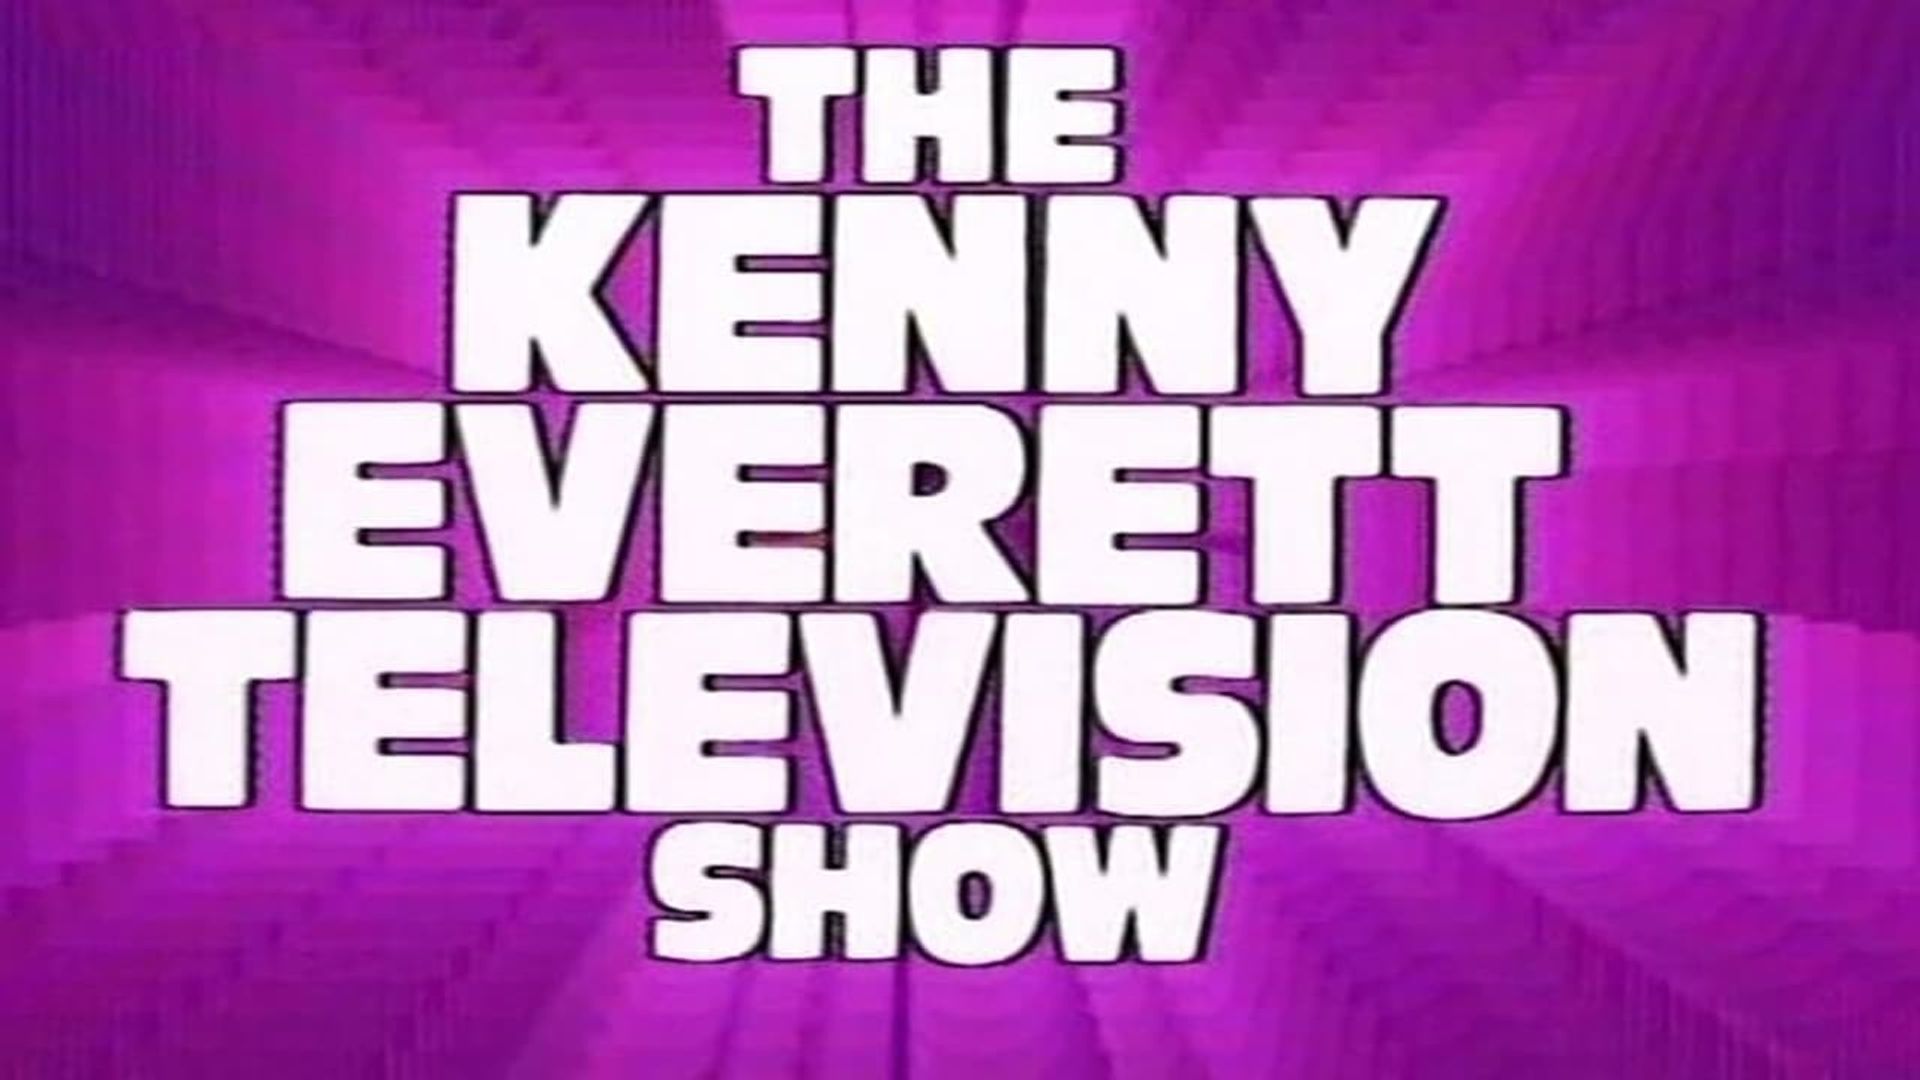 The Kenny Everett Television Show background